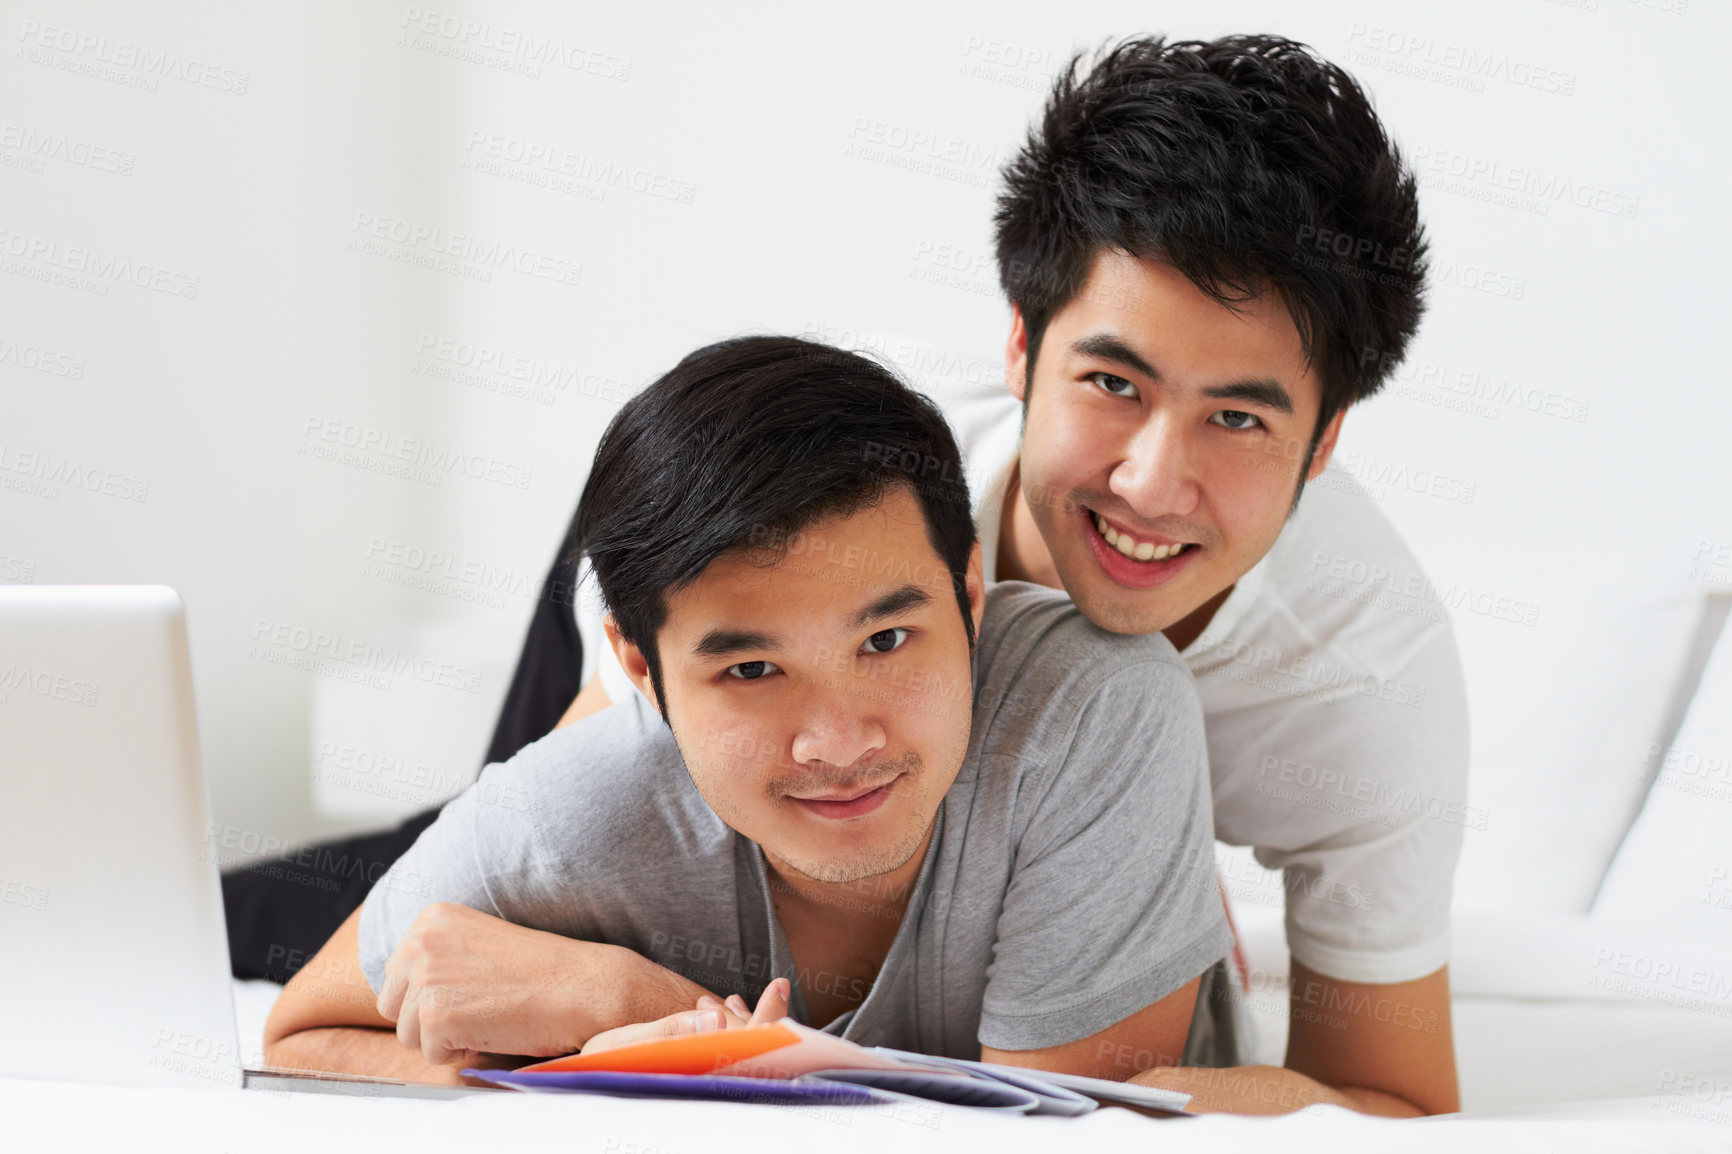 Buy stock photo Portrait, lgbt and love with an asian couple learning together in their home while bonding over education. Study, happy or smile with a gay man and partner in a house, studying as university students